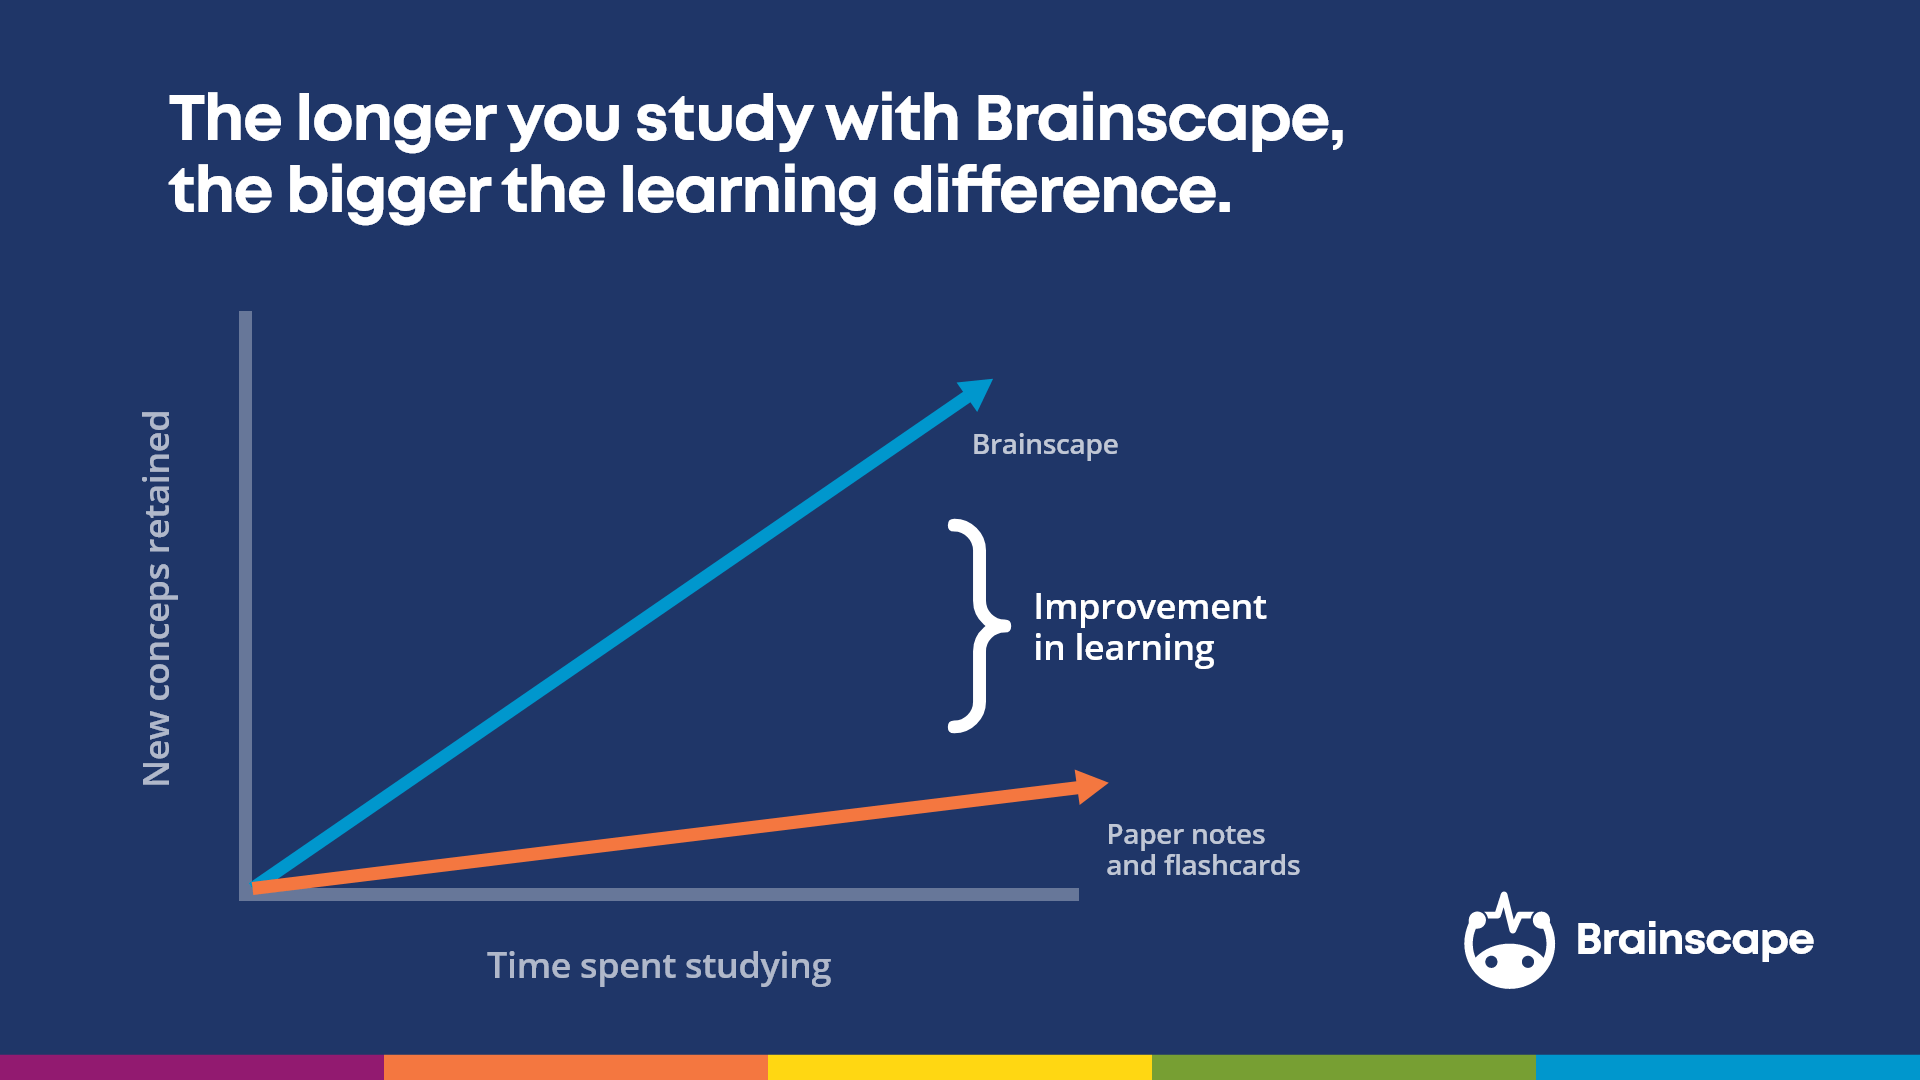 Memory retention over time with Brainscape